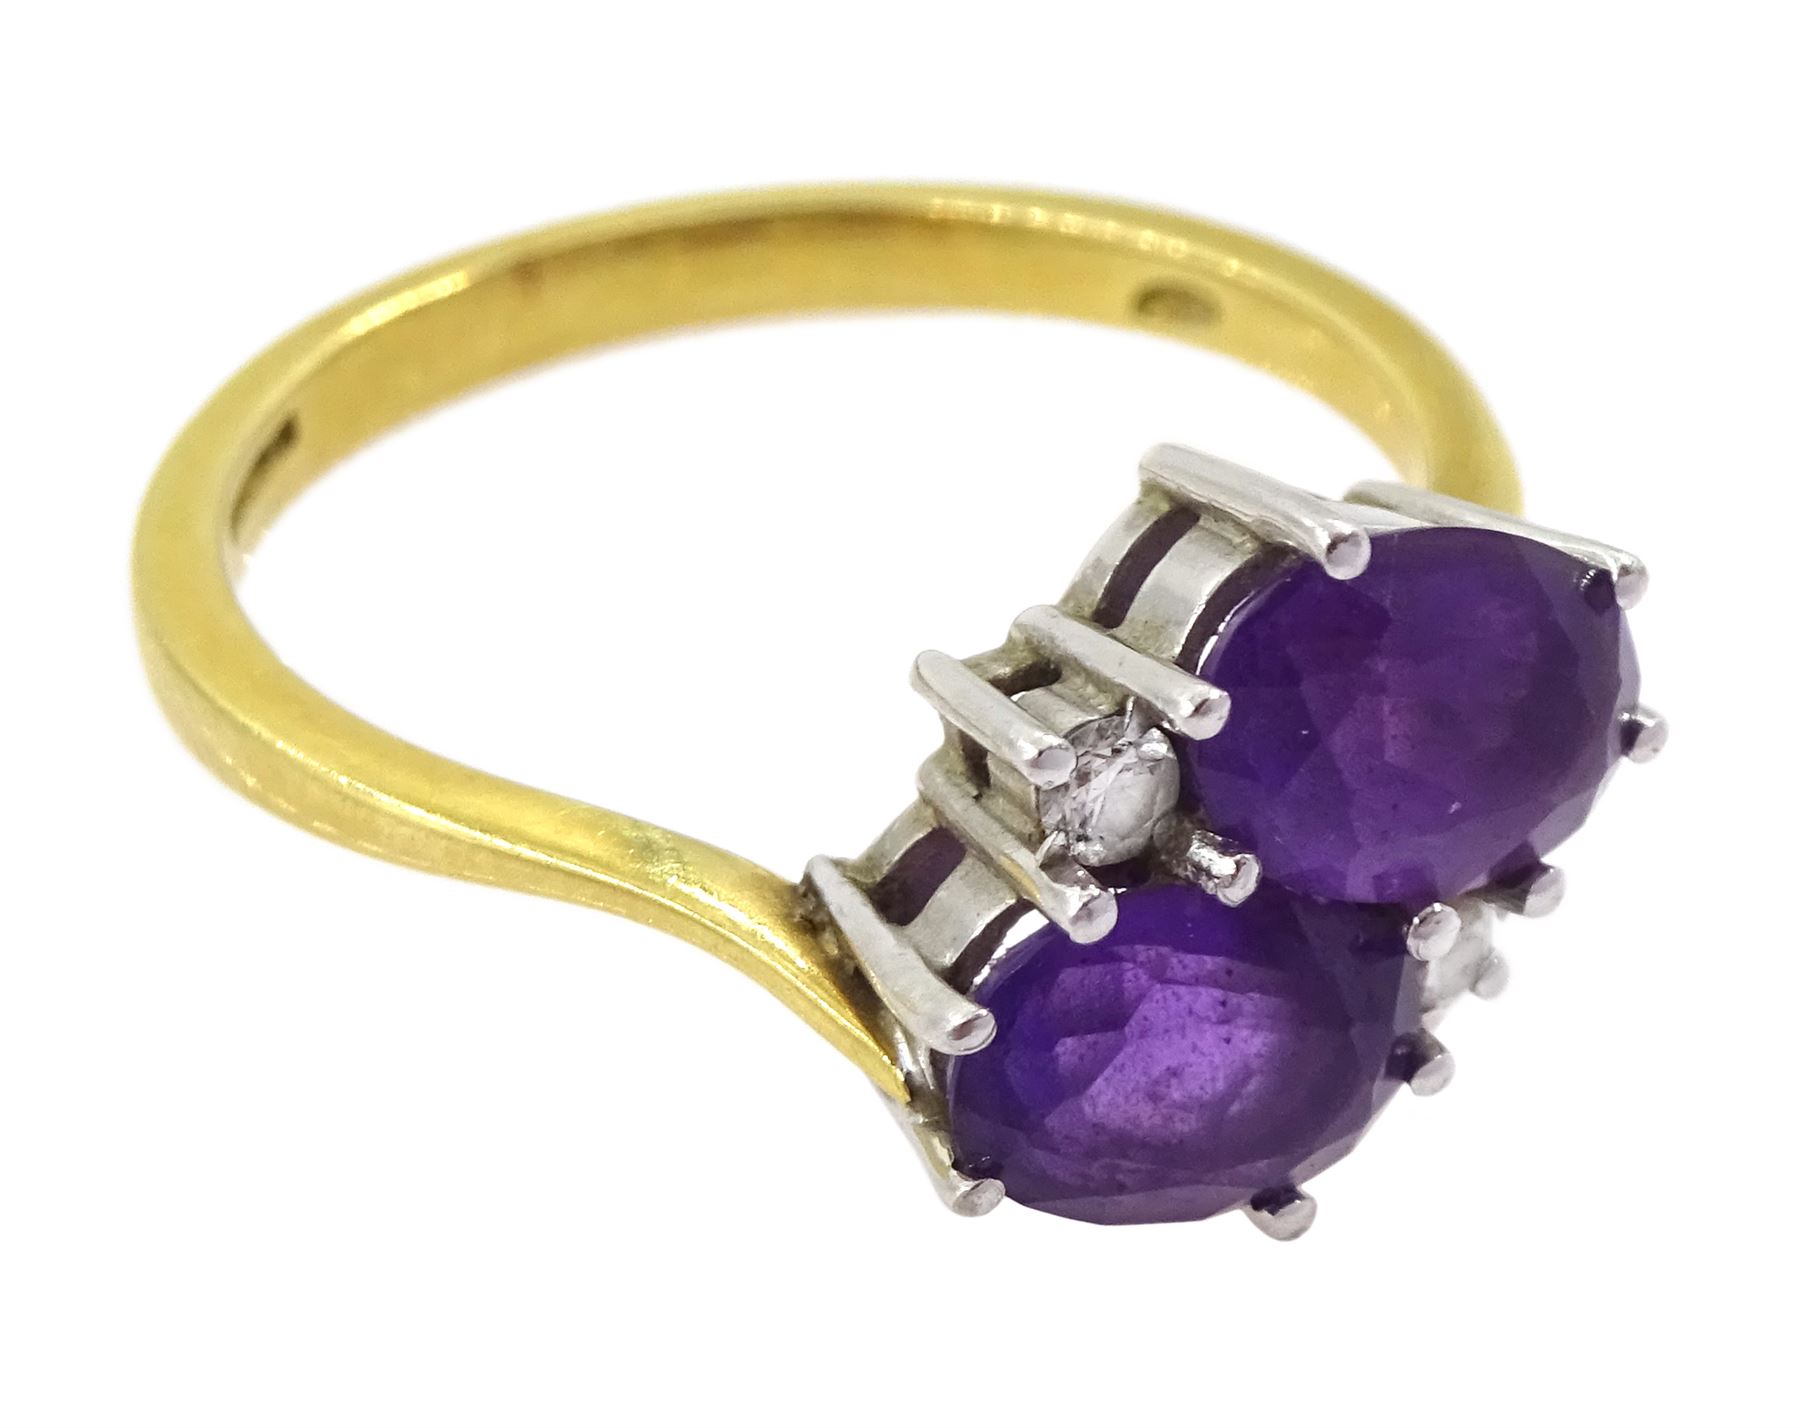 18ct gold four stone oval cut amethyst and round brilliant cut diamond ring - Image 3 of 4